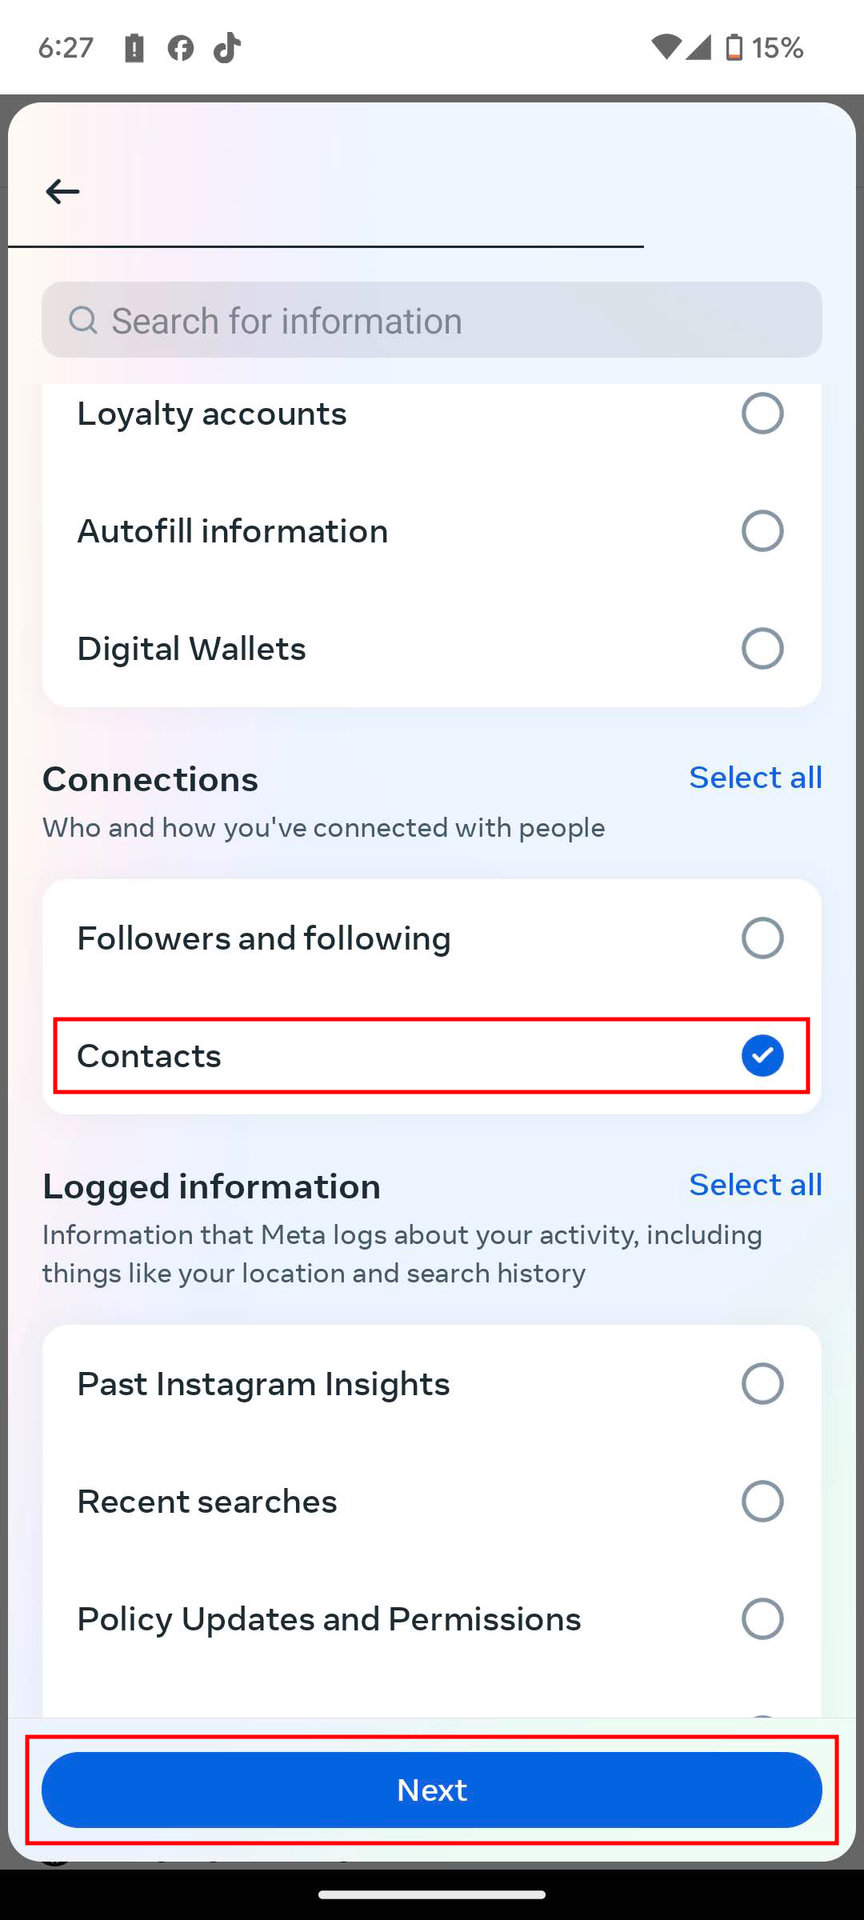 How to download your uploaded contacts from Meta on Android (8)